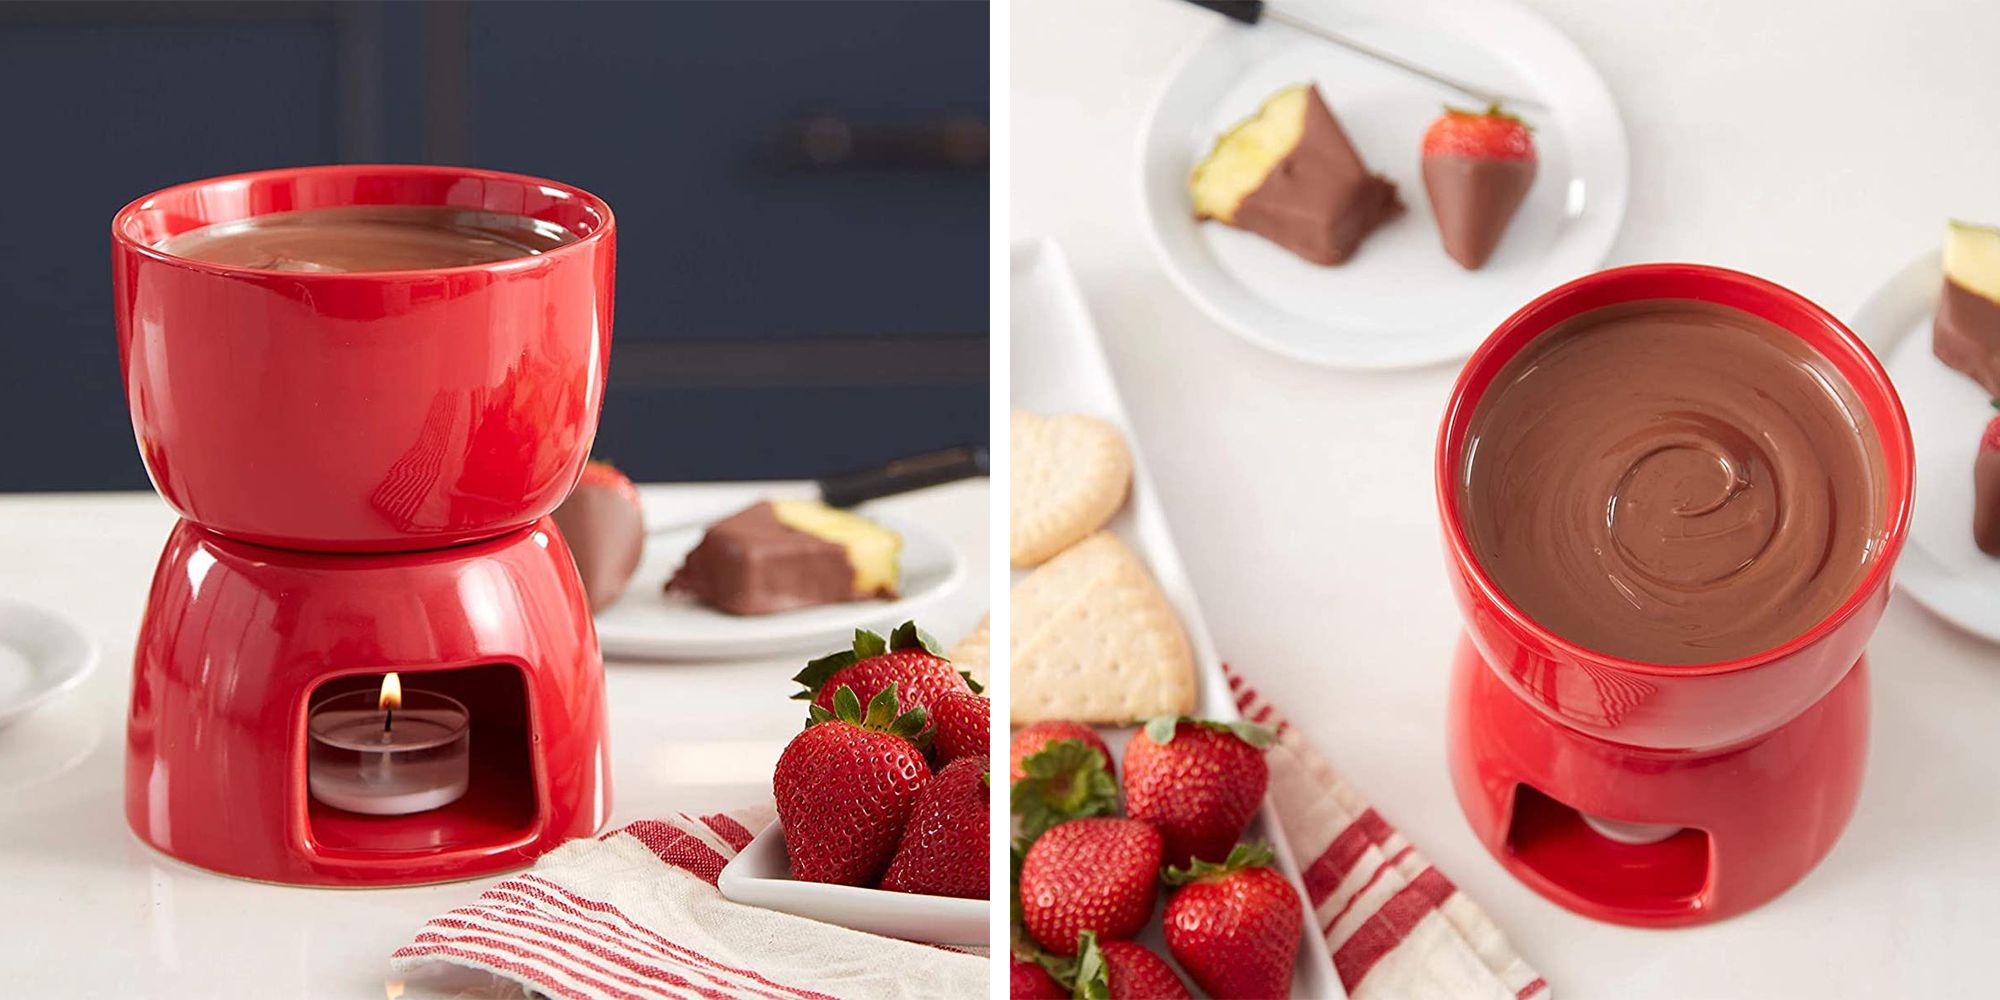 This Red Fondue Set Guarantees a Chocolate-Filled Dessert for Two 